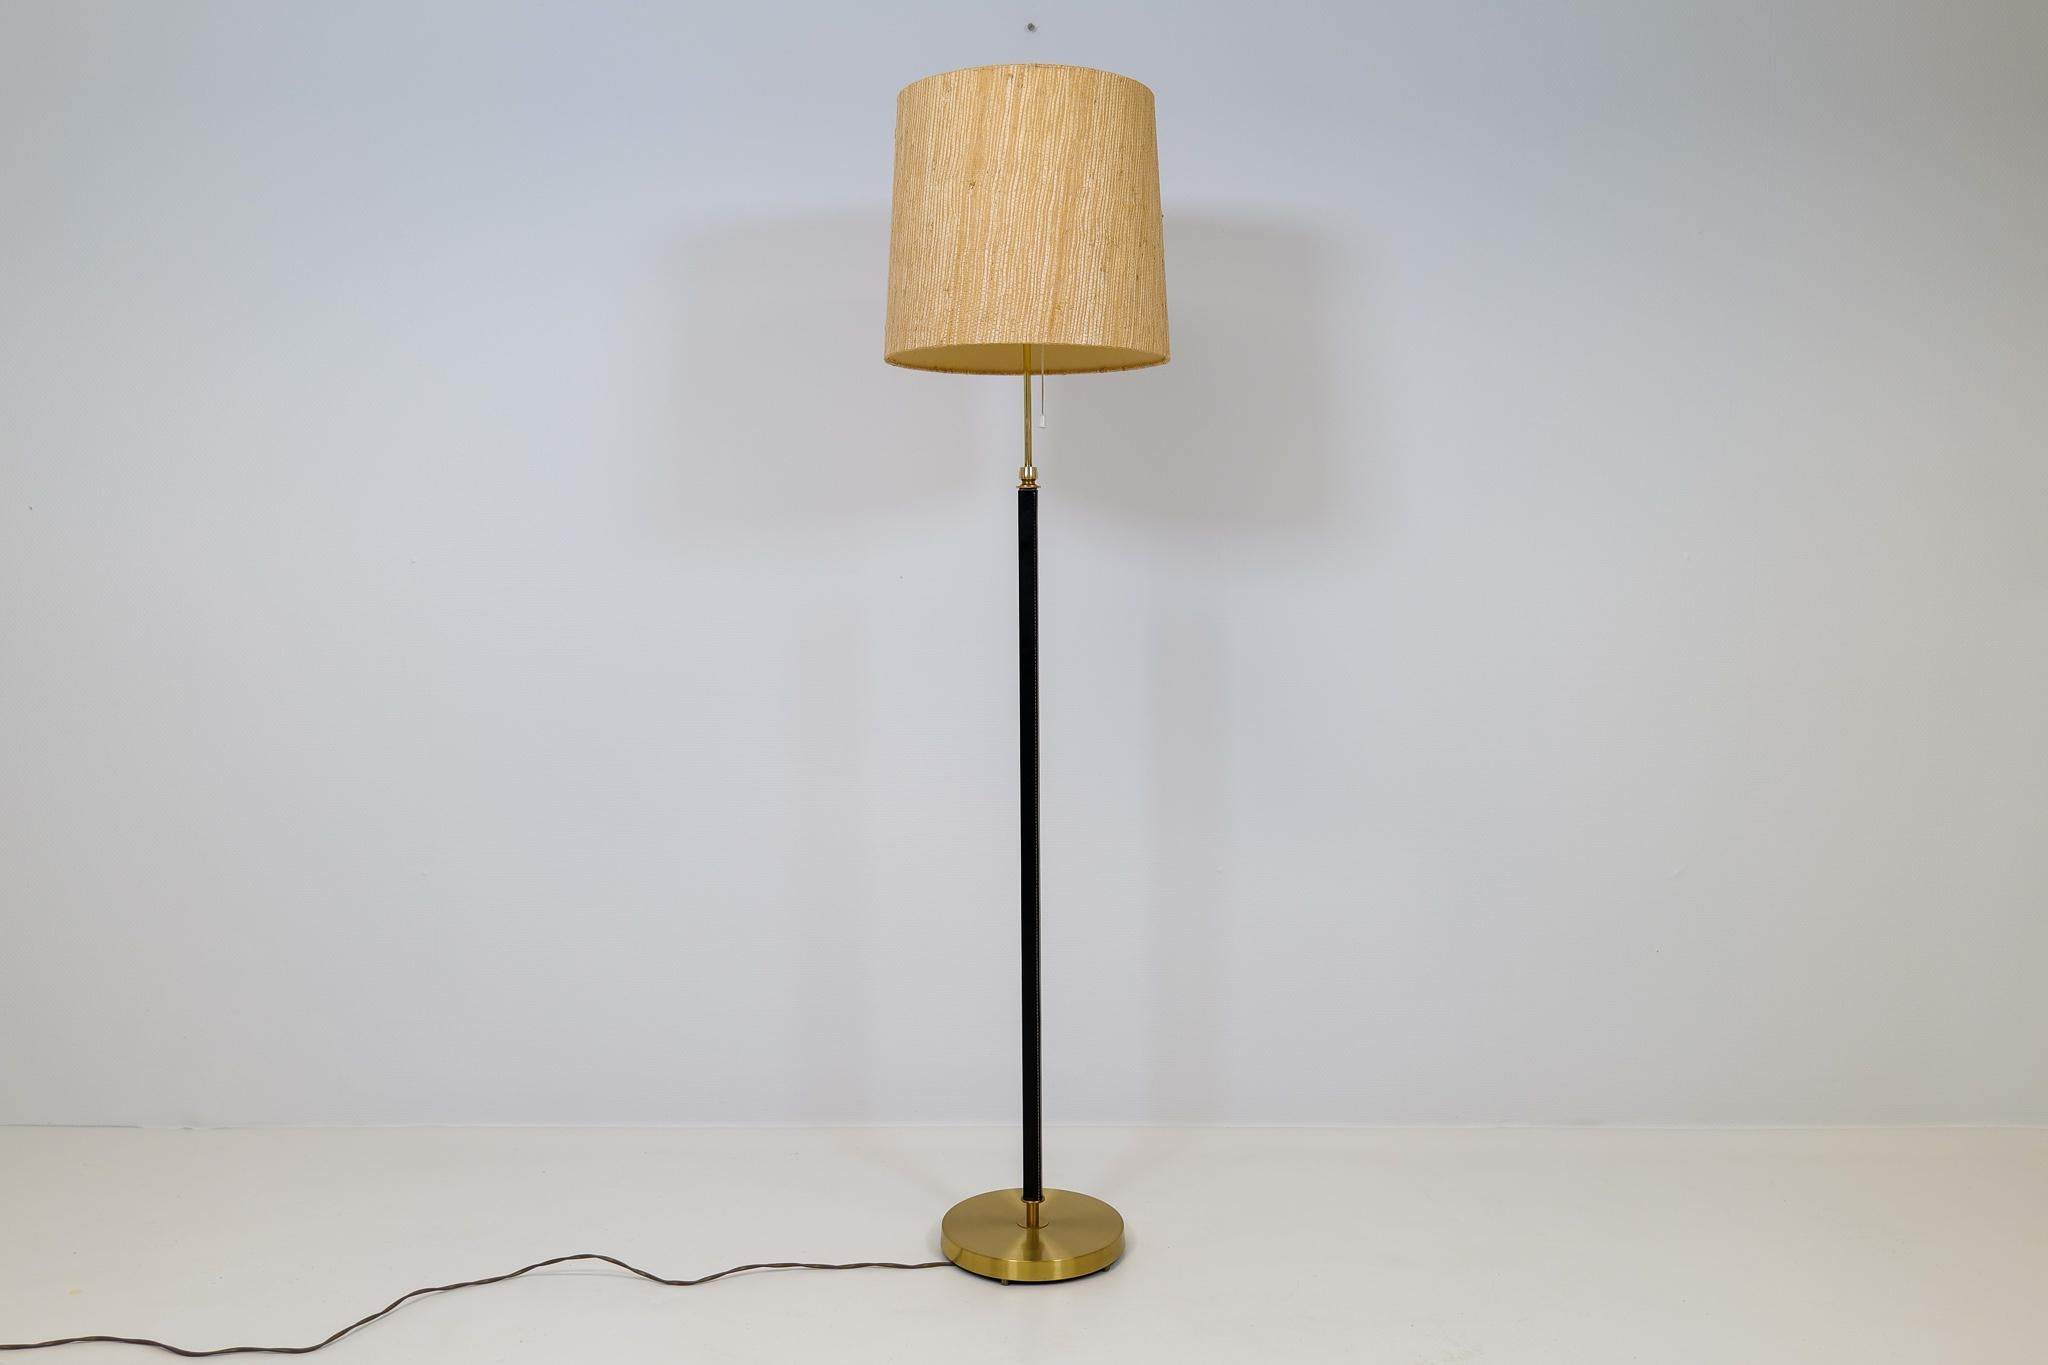 This lamp was made in Sweden at Falkenbergs Belysning. The combining of brass and black stained leather makes this lamp an icon. Original shade works good with the structure of the lamp.

Good working condition with some dents on the foot and